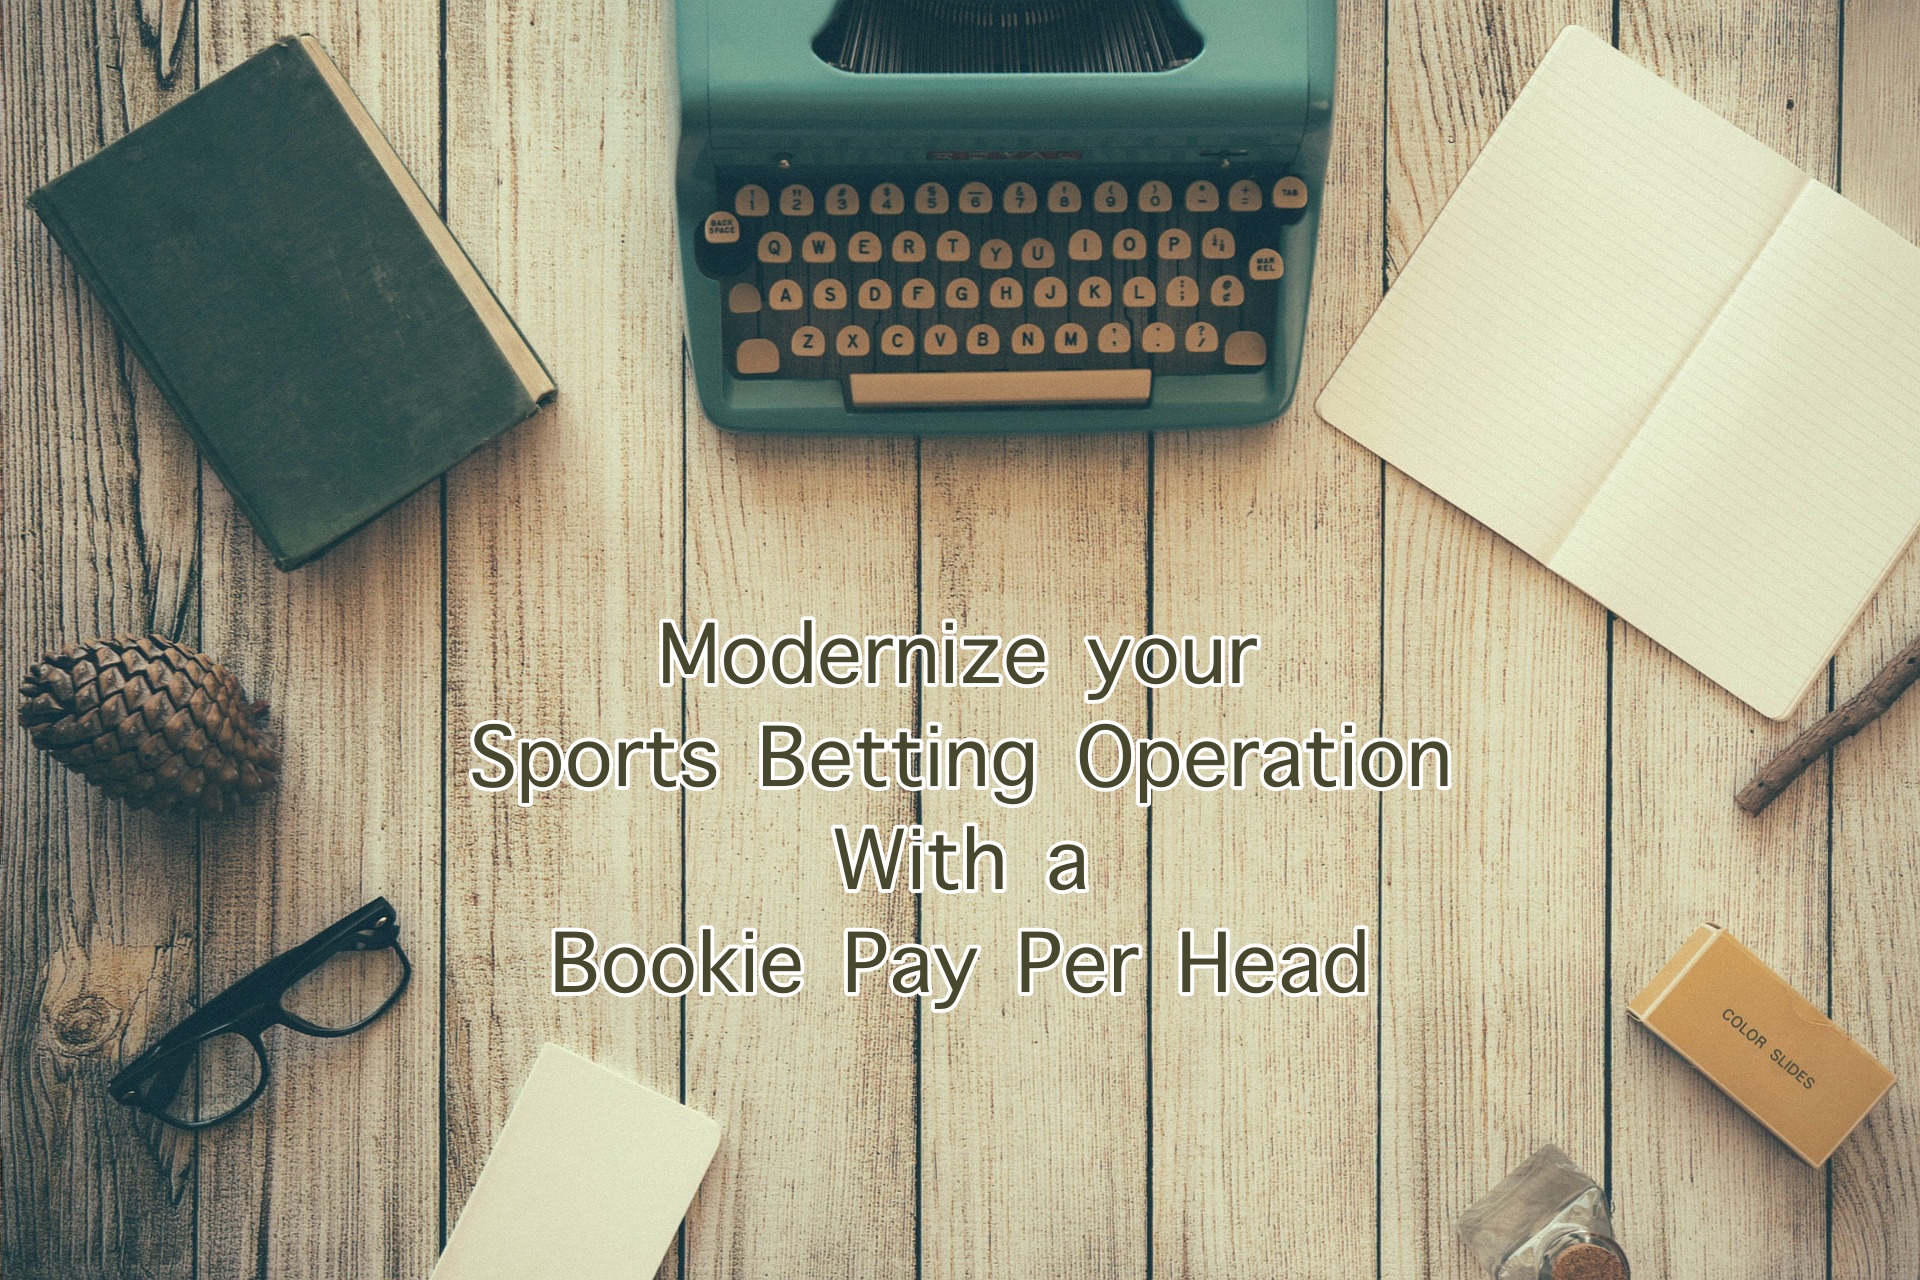 Modernize Your Sports Betting Operation with a Bookie Pay Per Head